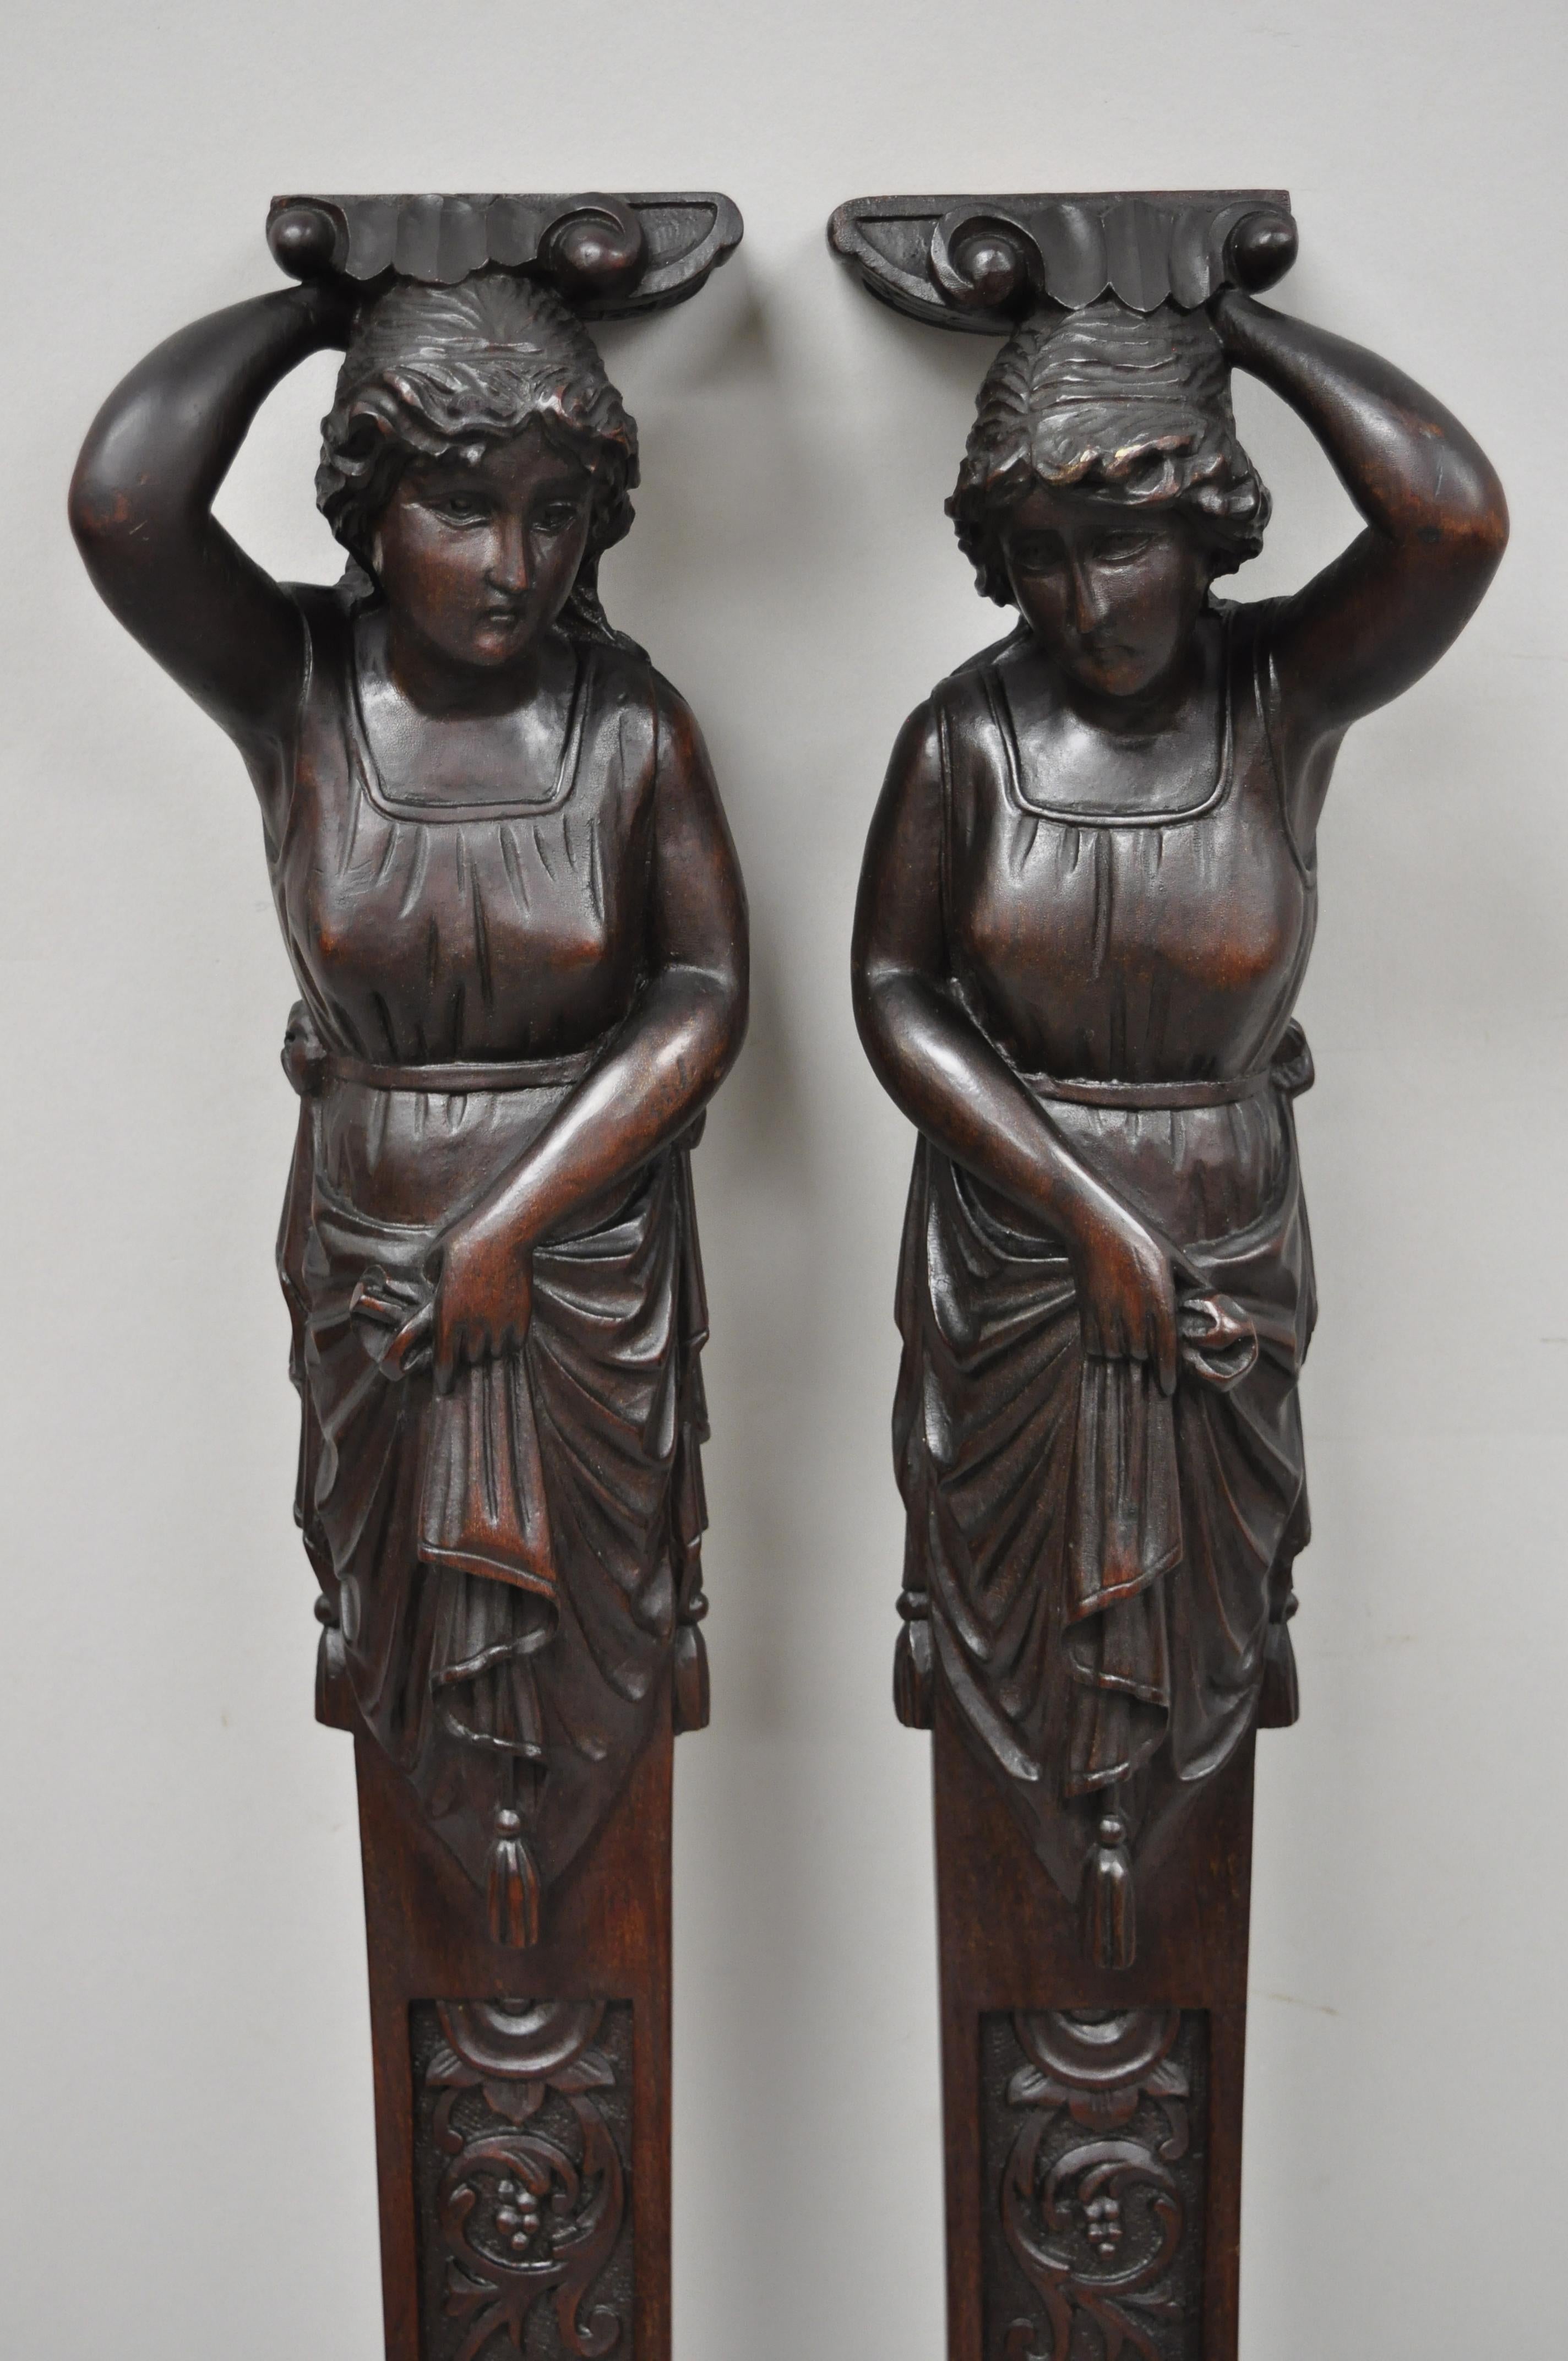 Pair of antique Victorian hand carved mahogany figural maiden architecture. Listing includes right and left maiden forms, carved leafy scrollwork, finely hand carved details, remarkable detail, solid wood construction, very nice antique set, circa